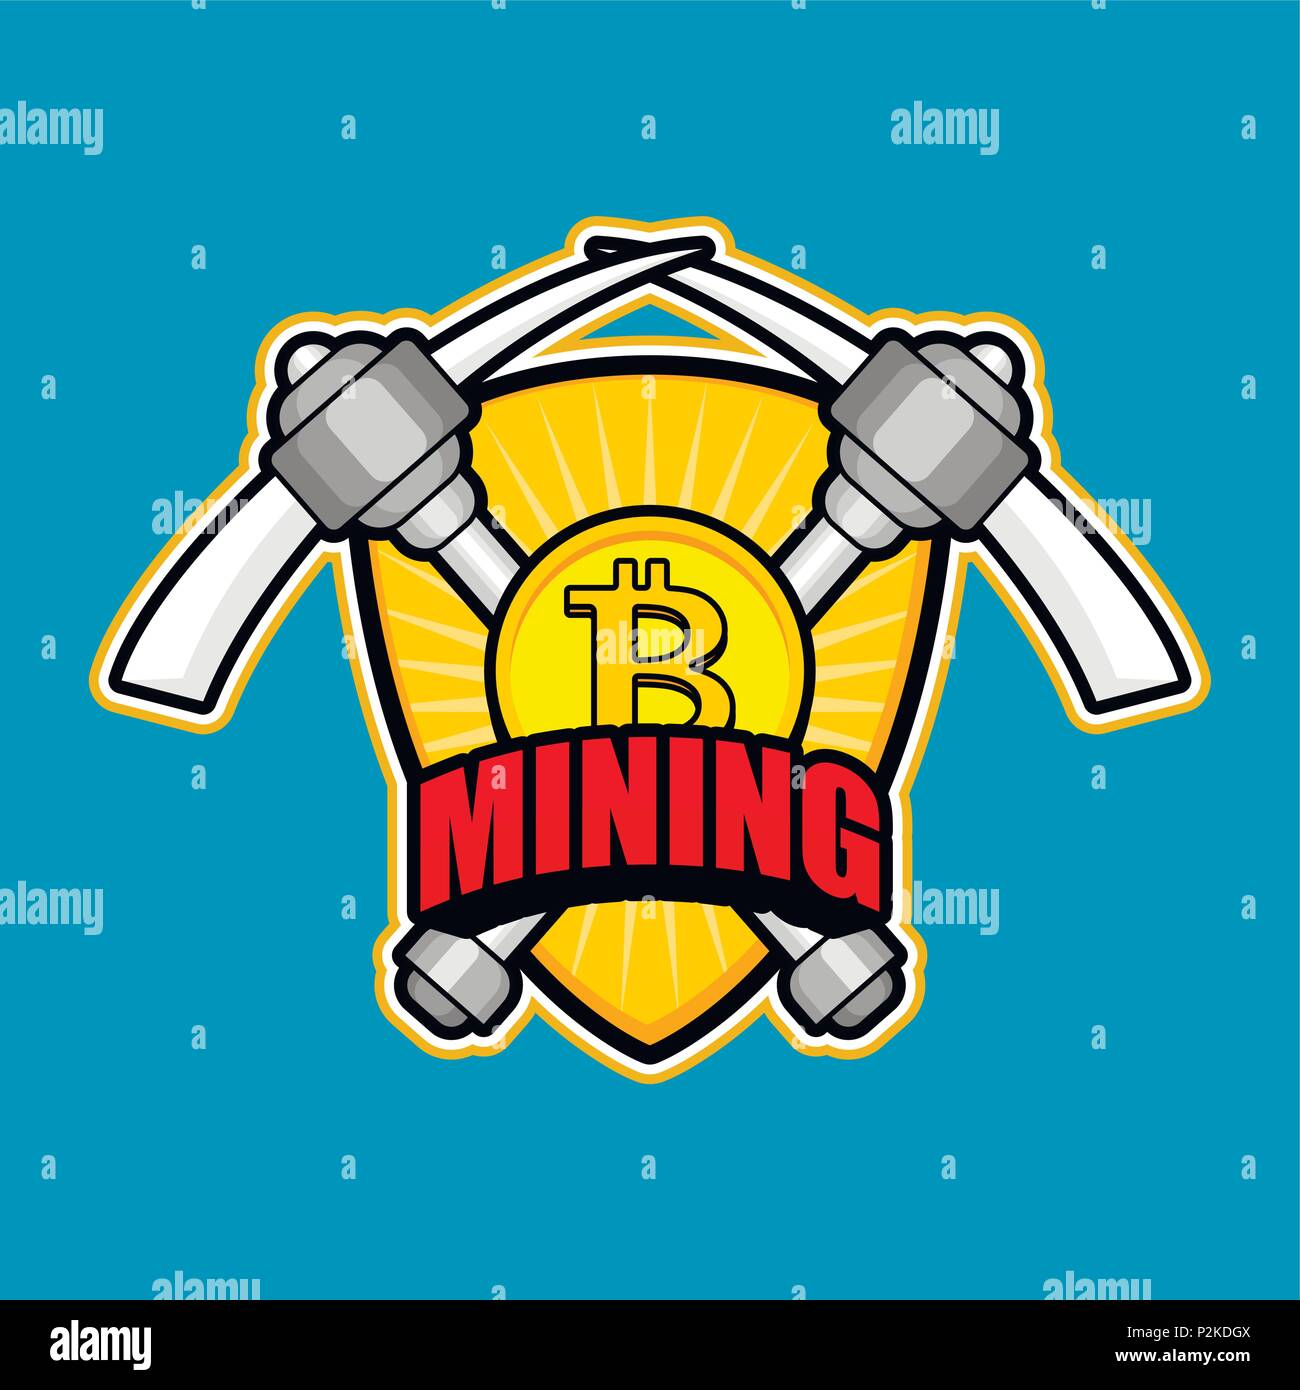 Mining Bitcoin emblem. Pick Cryptocurrency sign. Extraction of Crypto currency symbol. Vector illustration Stock Vector